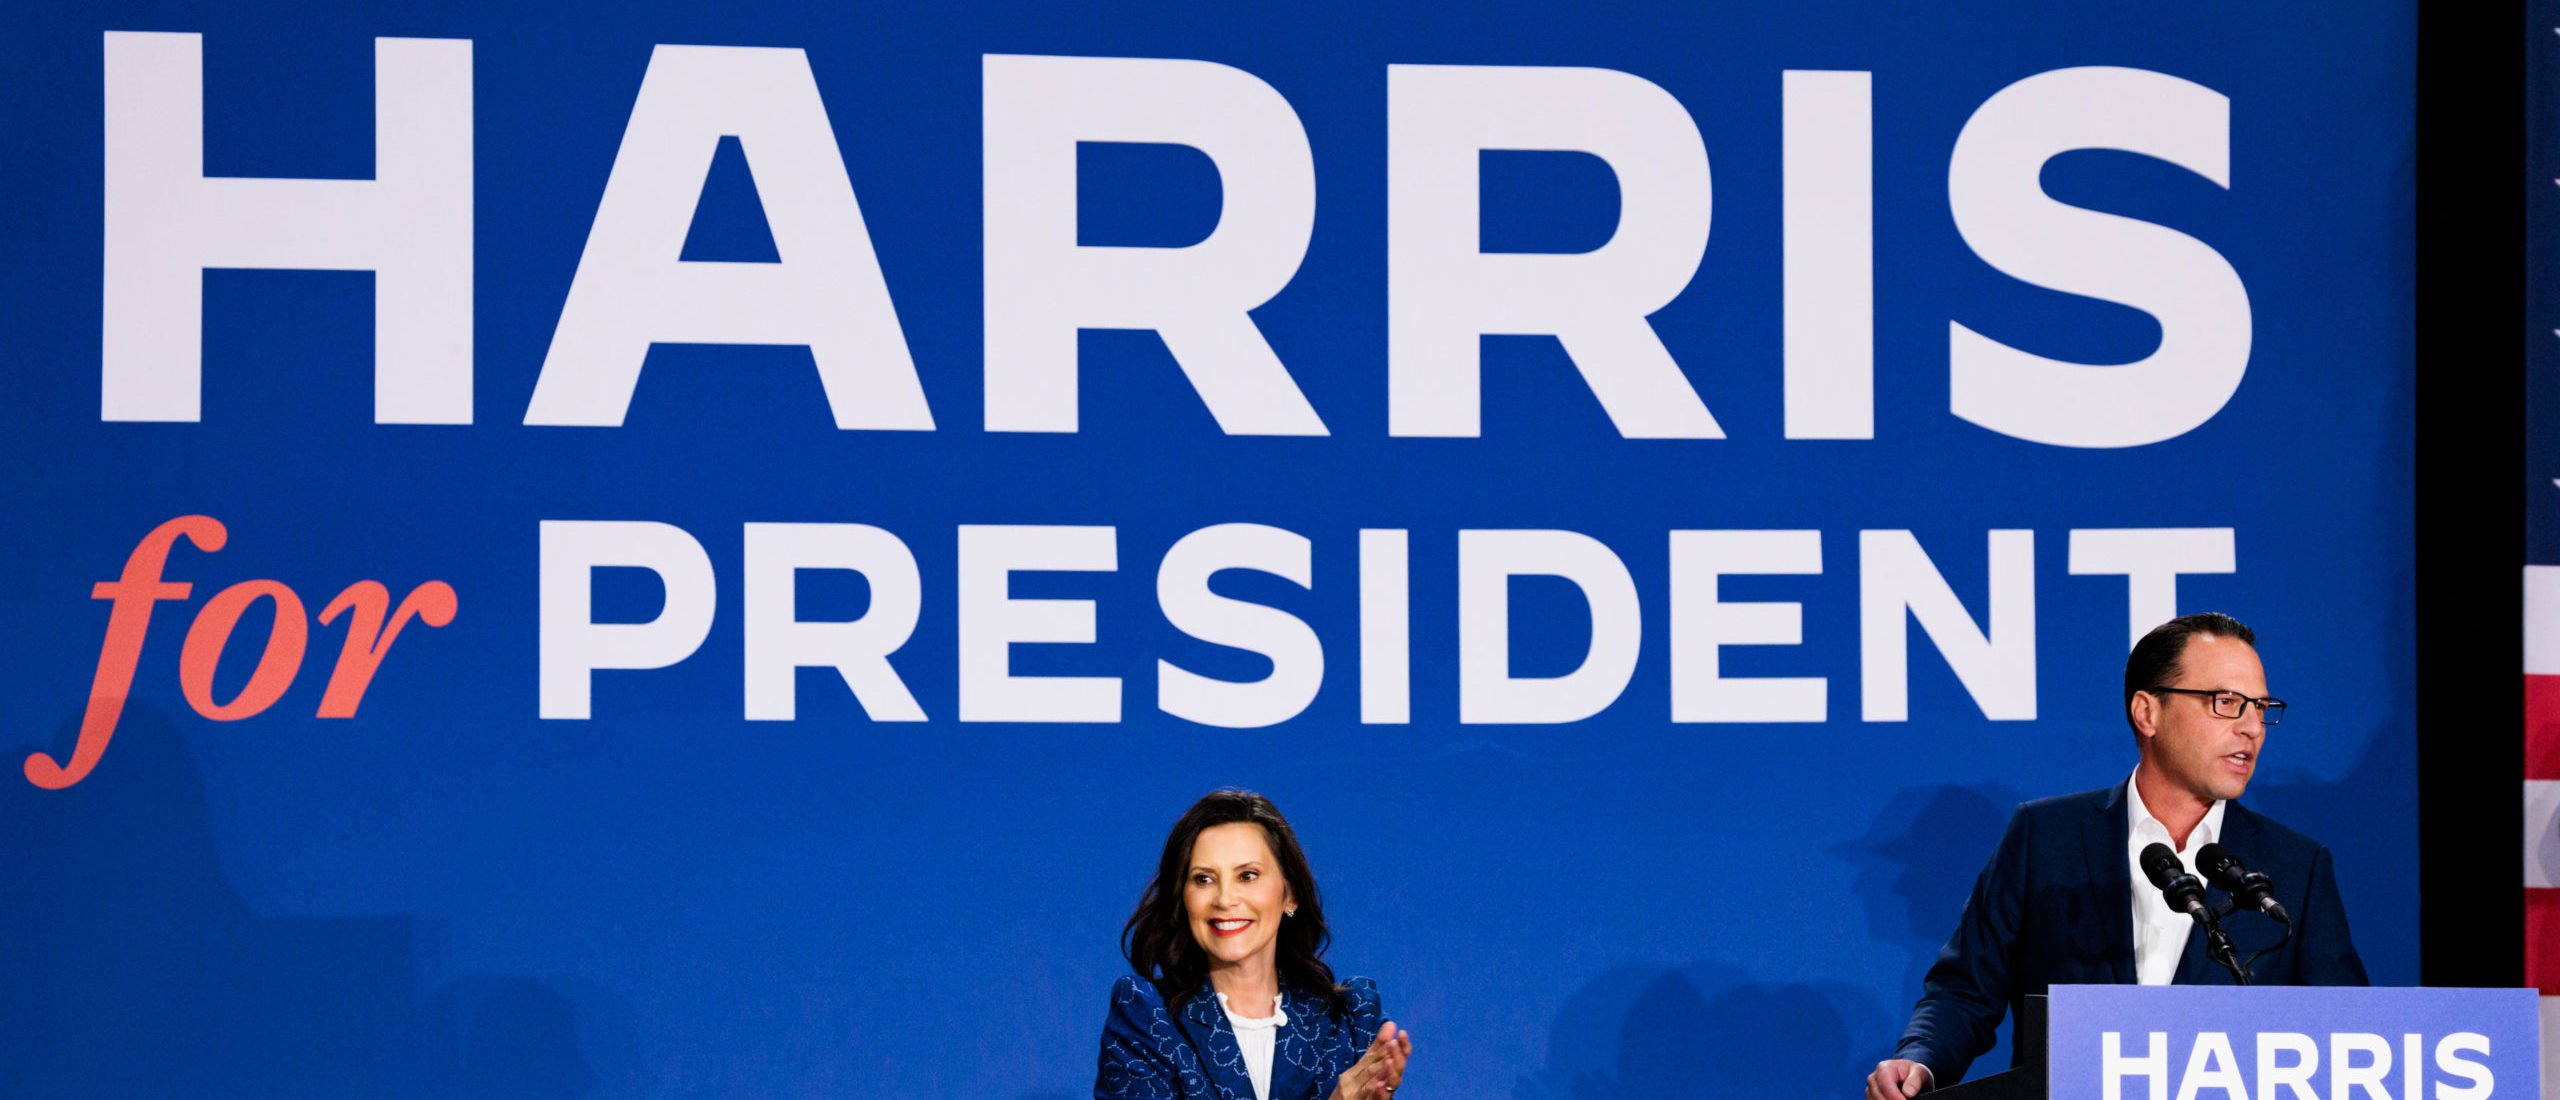 AMBLER, PENNSYLVANIA - JULY 29: Michigan Governor Gretchen Whitmer applauds as Pennsylvania Governor Josh Shapiro speaks during a campaign rally for Vice President Kamala Harris on July 29, 2024 in Ambler, Pennsylvania. Shapiro and Whitmer campaigned to bring supporters behind Vice President Harris's campaign to protect Americans' freedoms, lower costs for families, and slam Trump's Project 2025 agenda. (Photo by Hannah Beier/Getty Images)